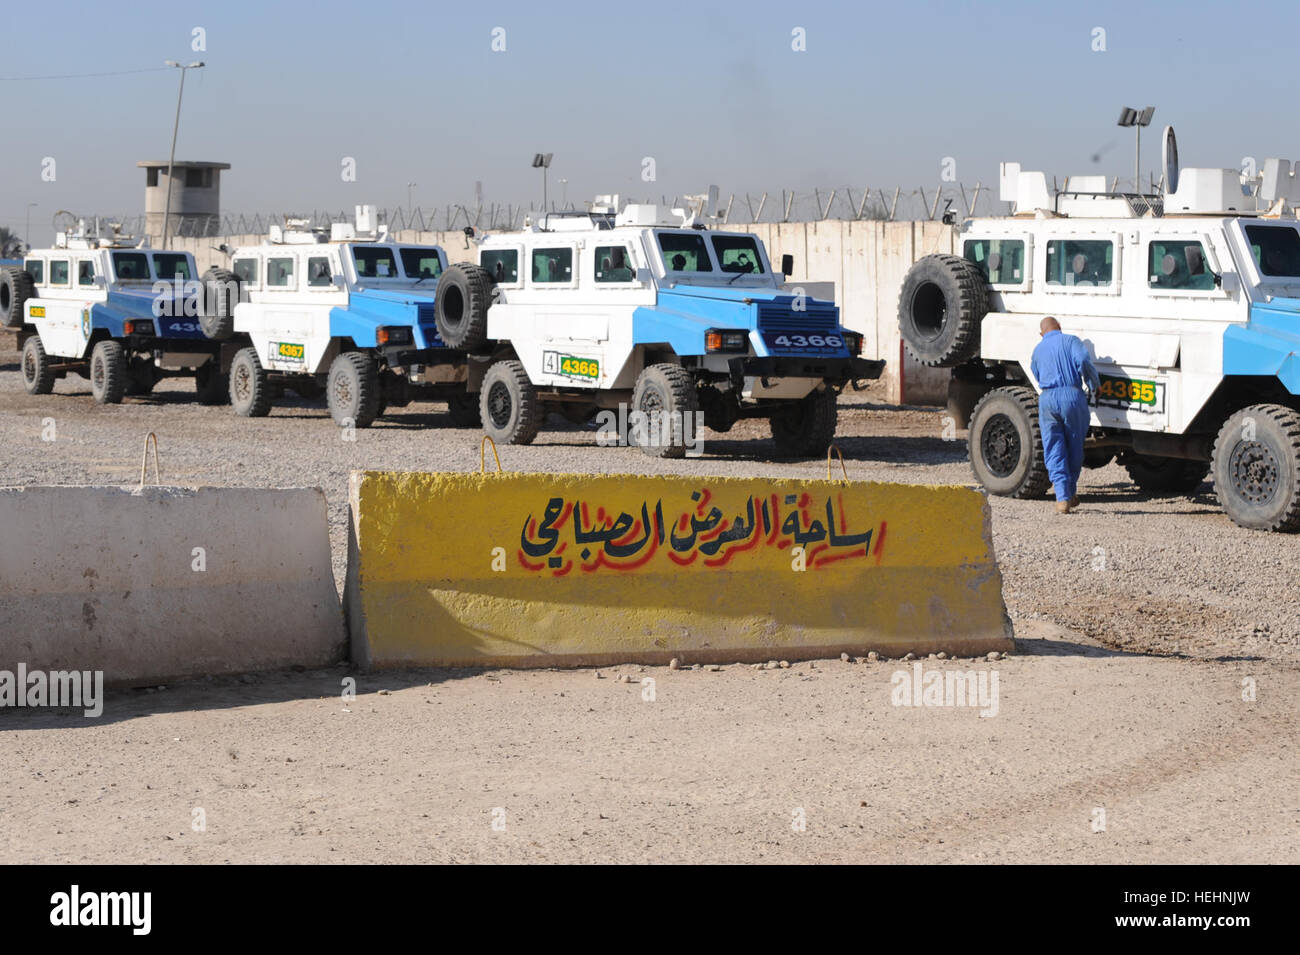 Iraqi National Police armored vehicles line up for a convoy at Joint Security Station Beladiyat, in Muhallah 732, at Beladiyat, in eastern Baghdad, Iraq, Jan. 5, 2009. (U.S. Army photo by Staff Sgt. James Selesnick/Released) Iraqi National Police armored vehicles Stock Photo